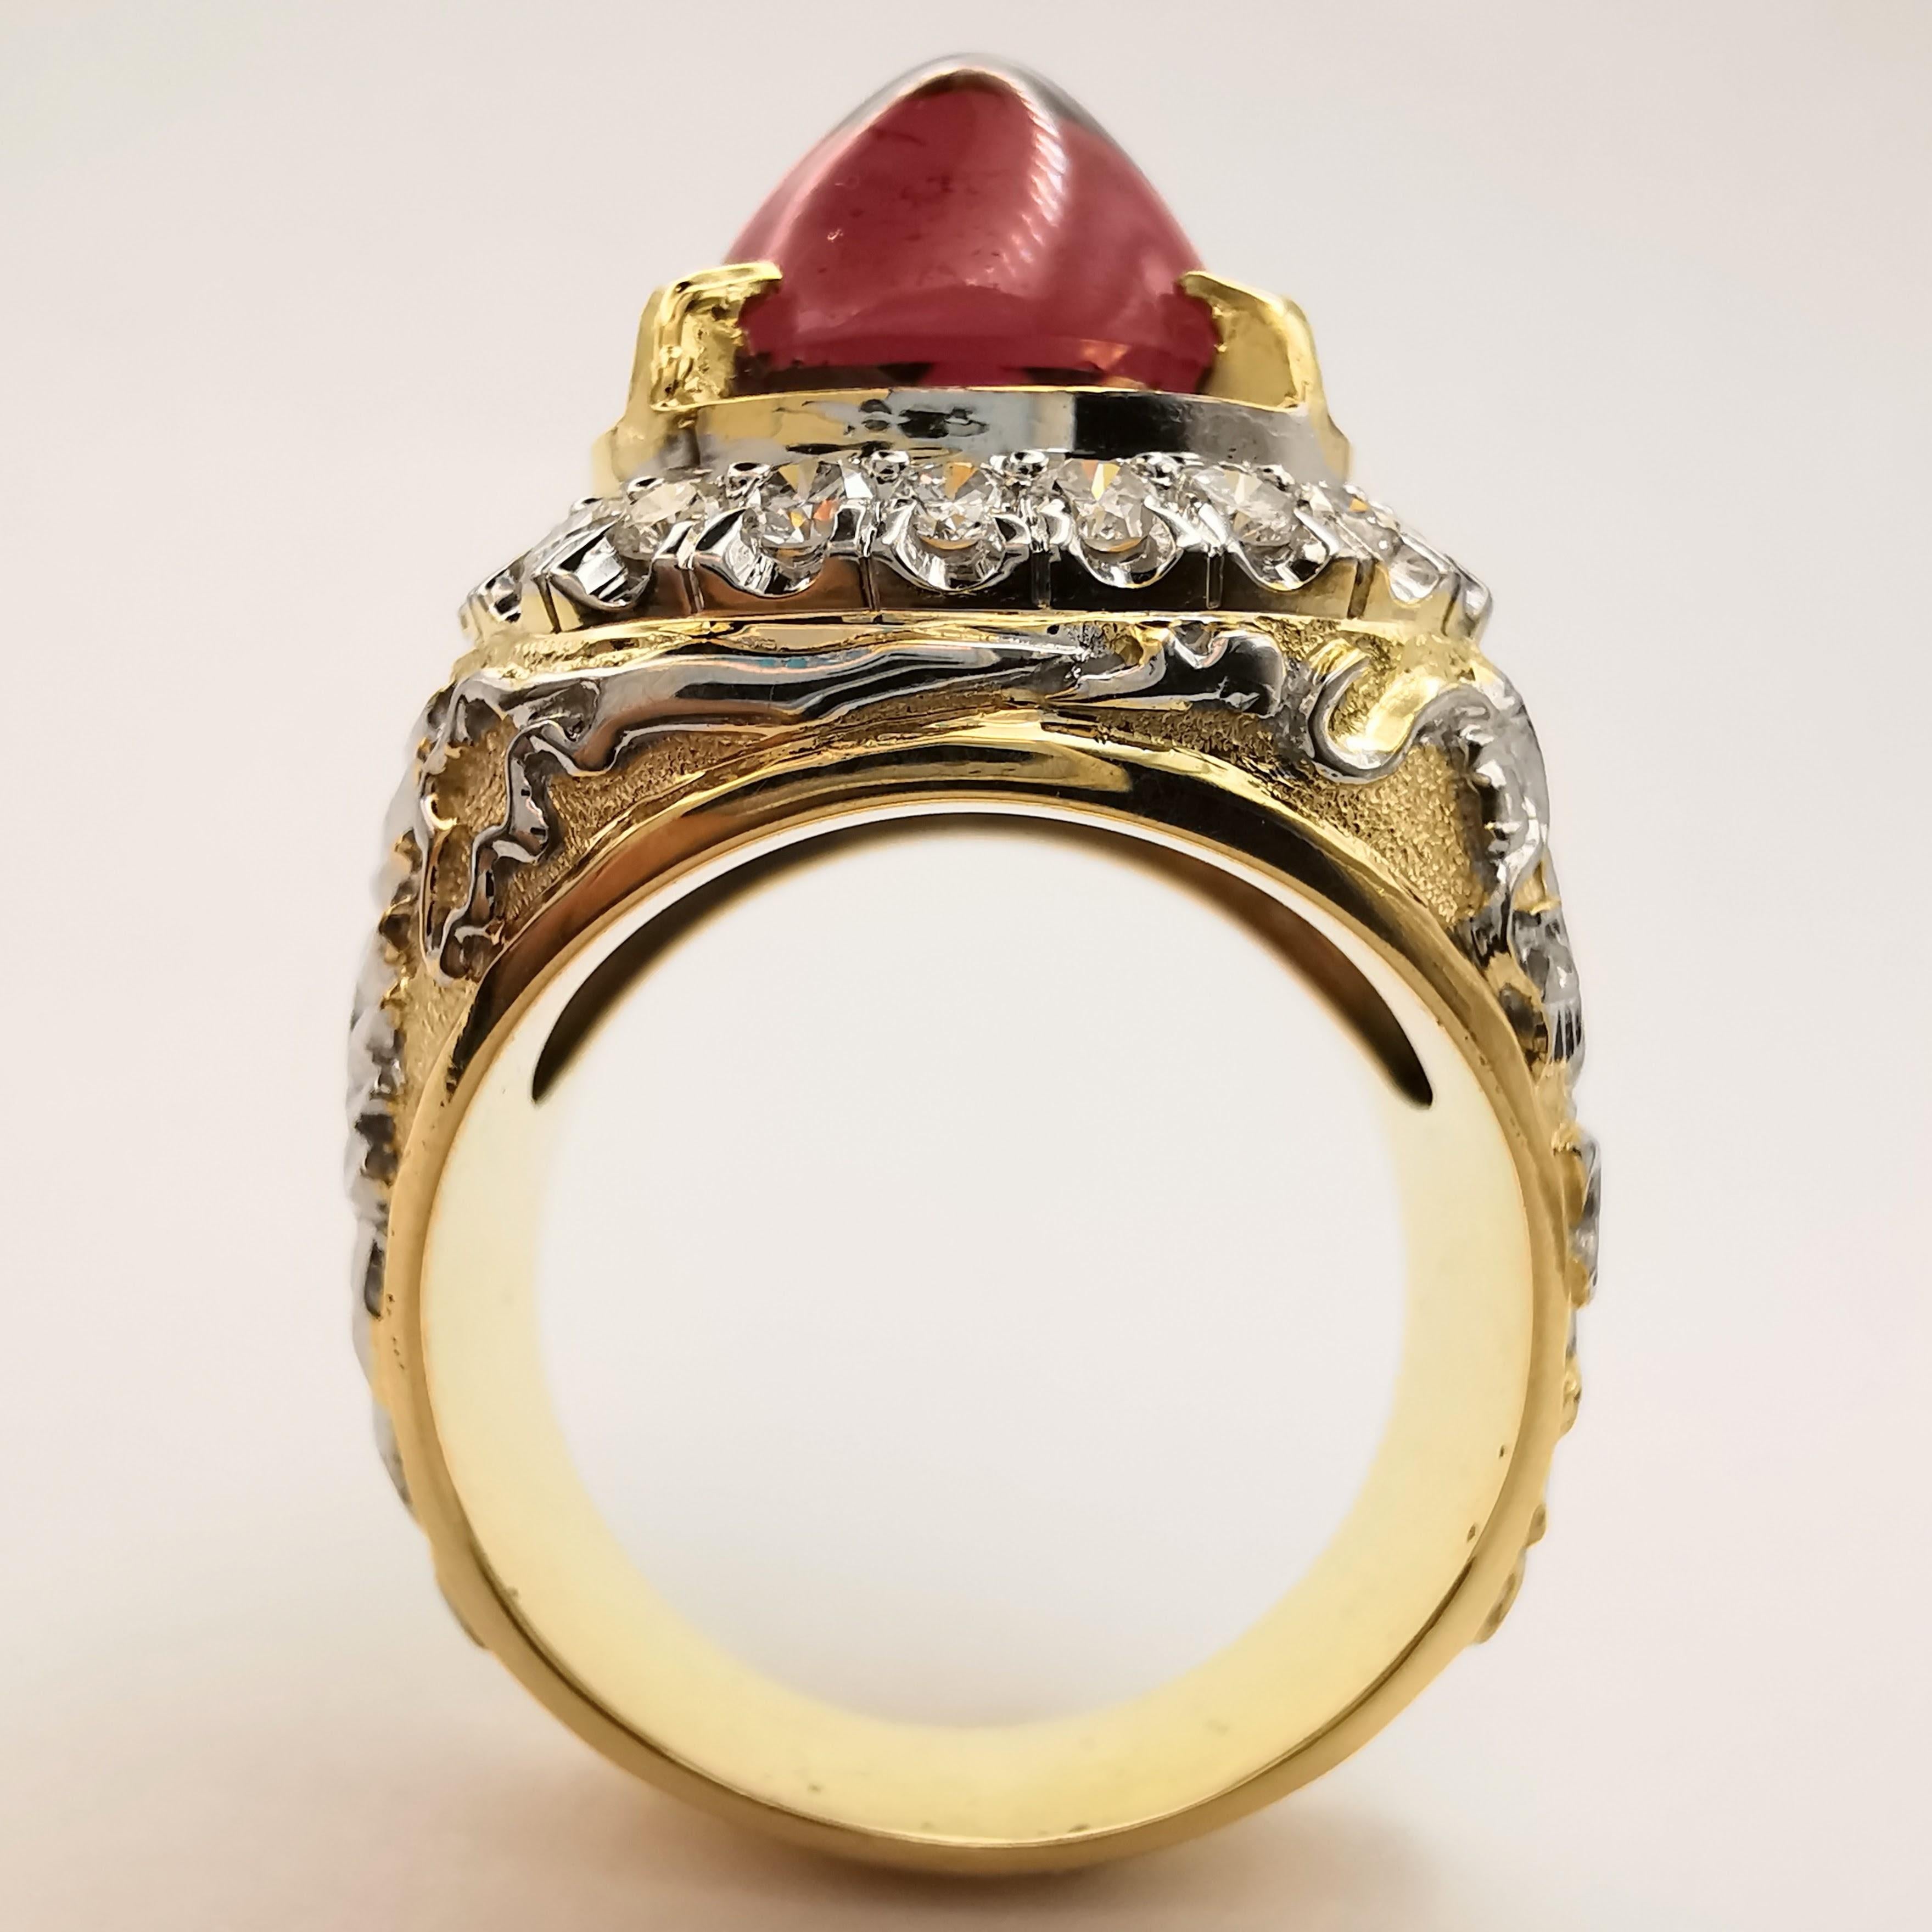 Vintage Dragon 10.2ct Cabochon Pink Tourmaline Diamond Men's Ring in 18K Gold For Sale 3